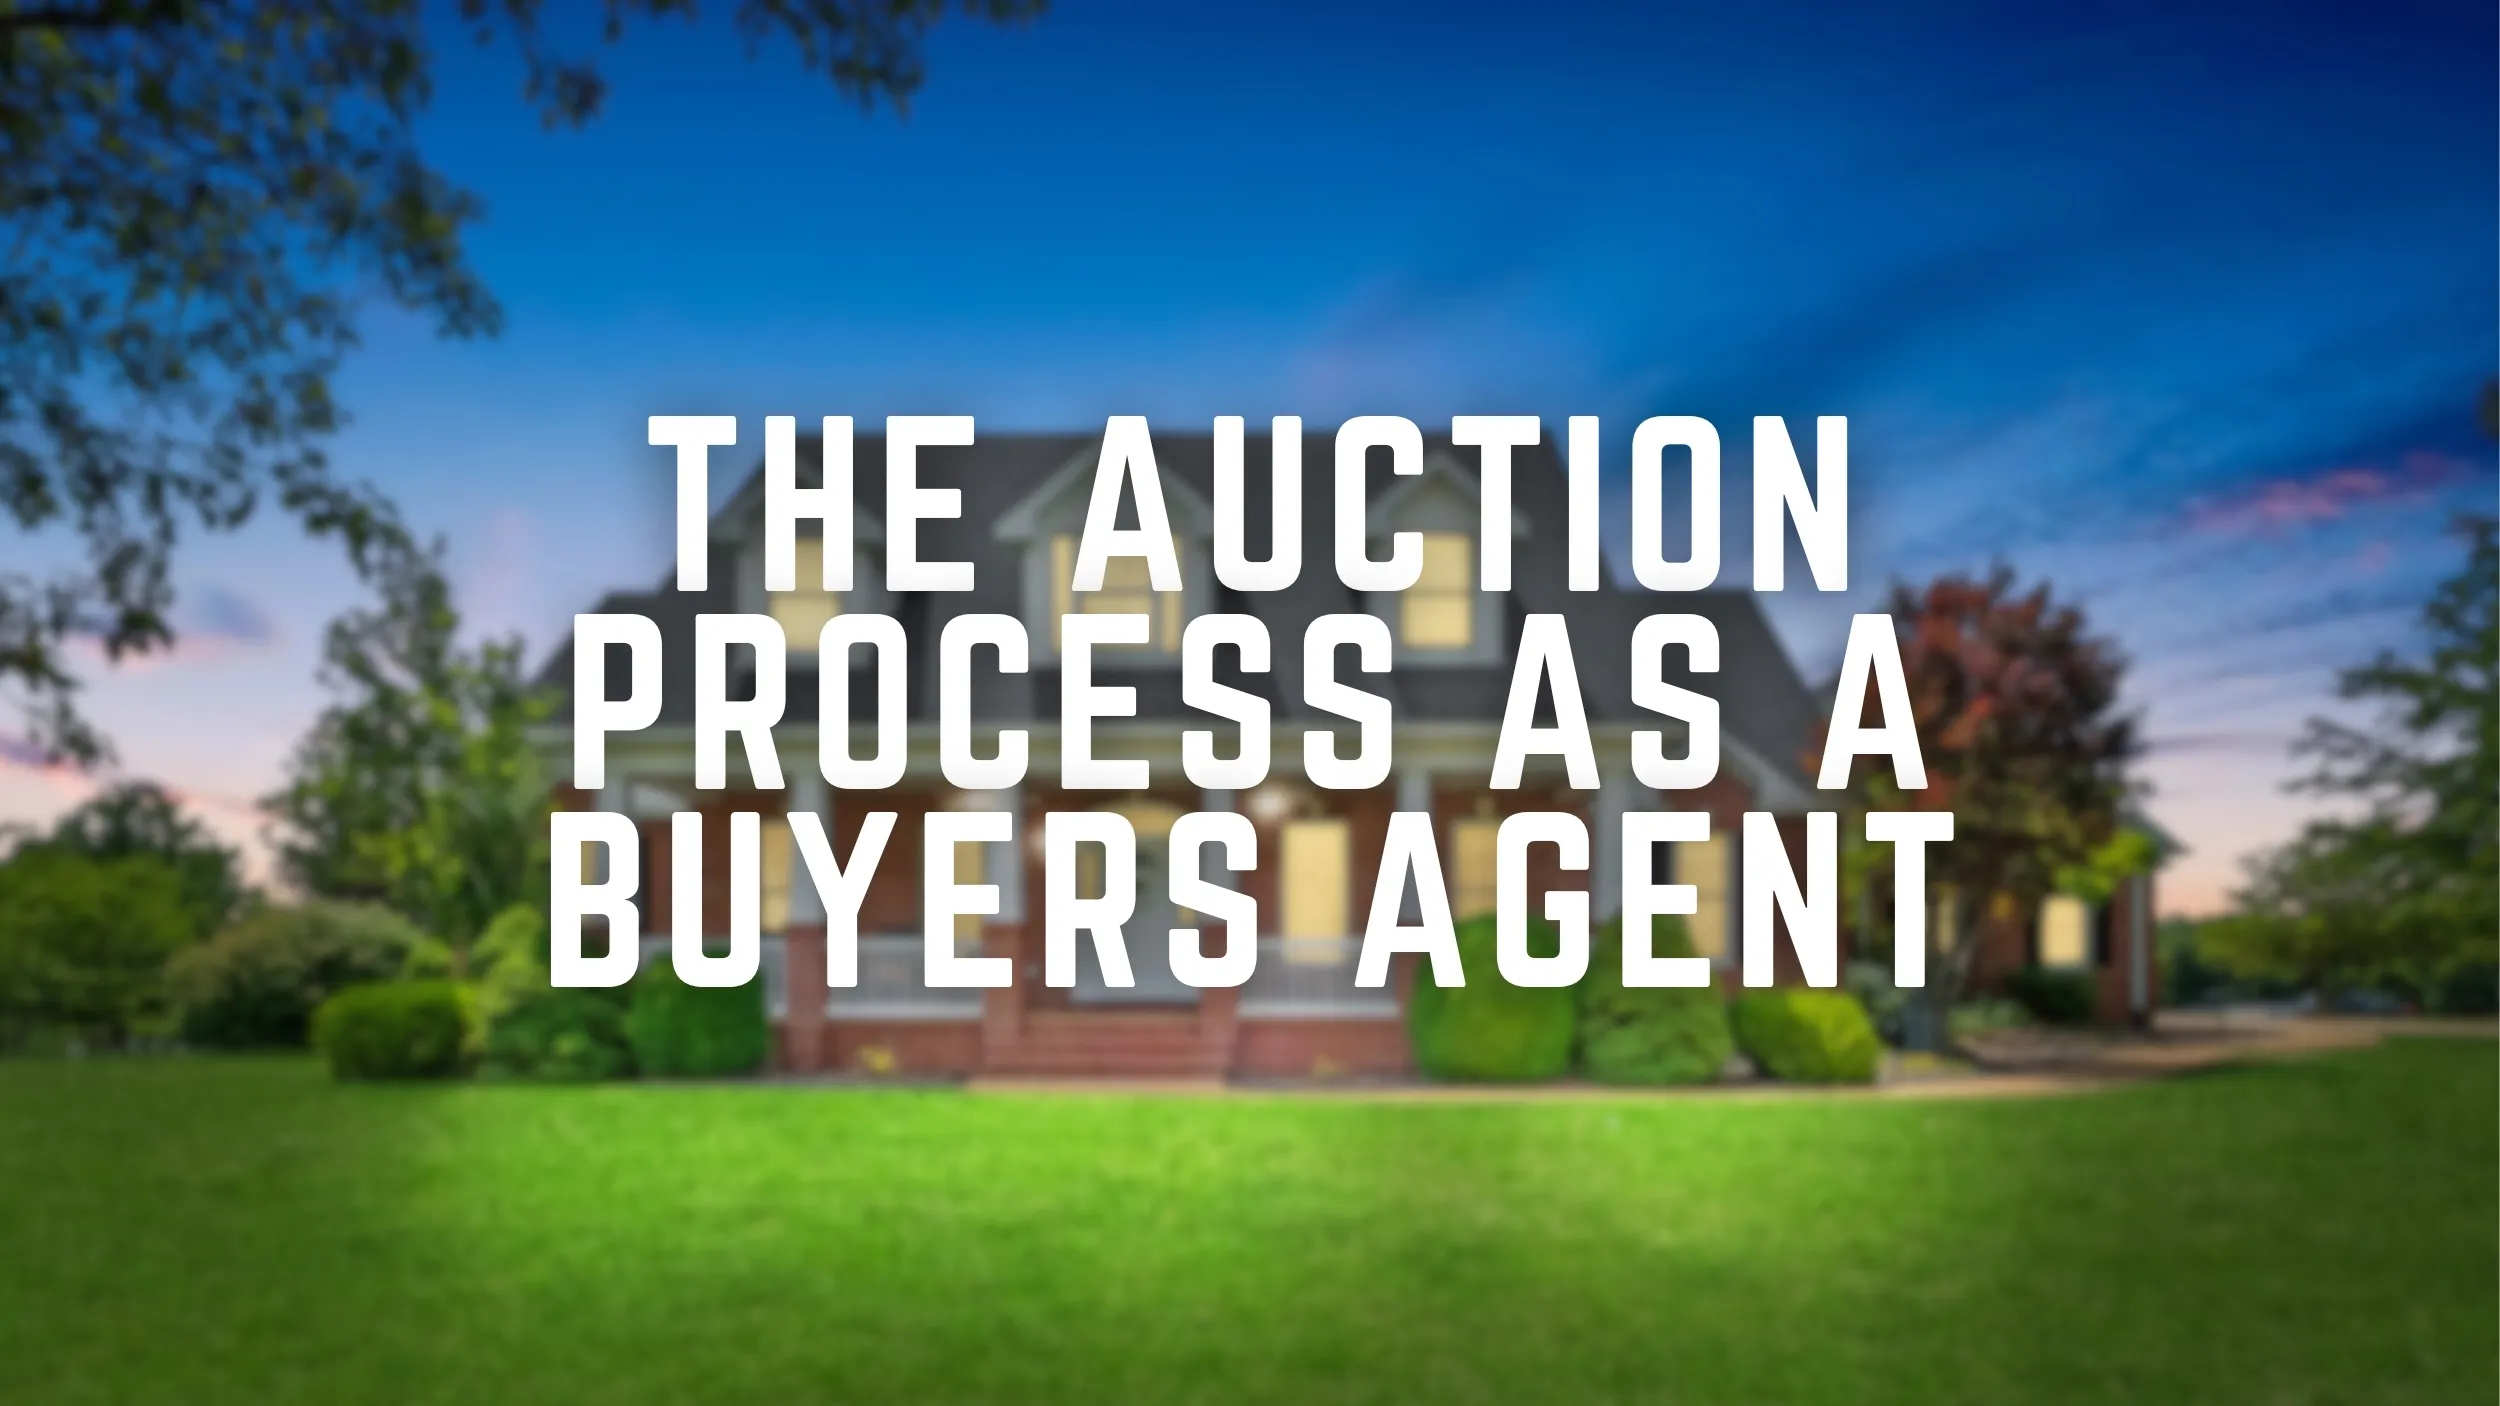 The Auction Process as a Buyers Agent